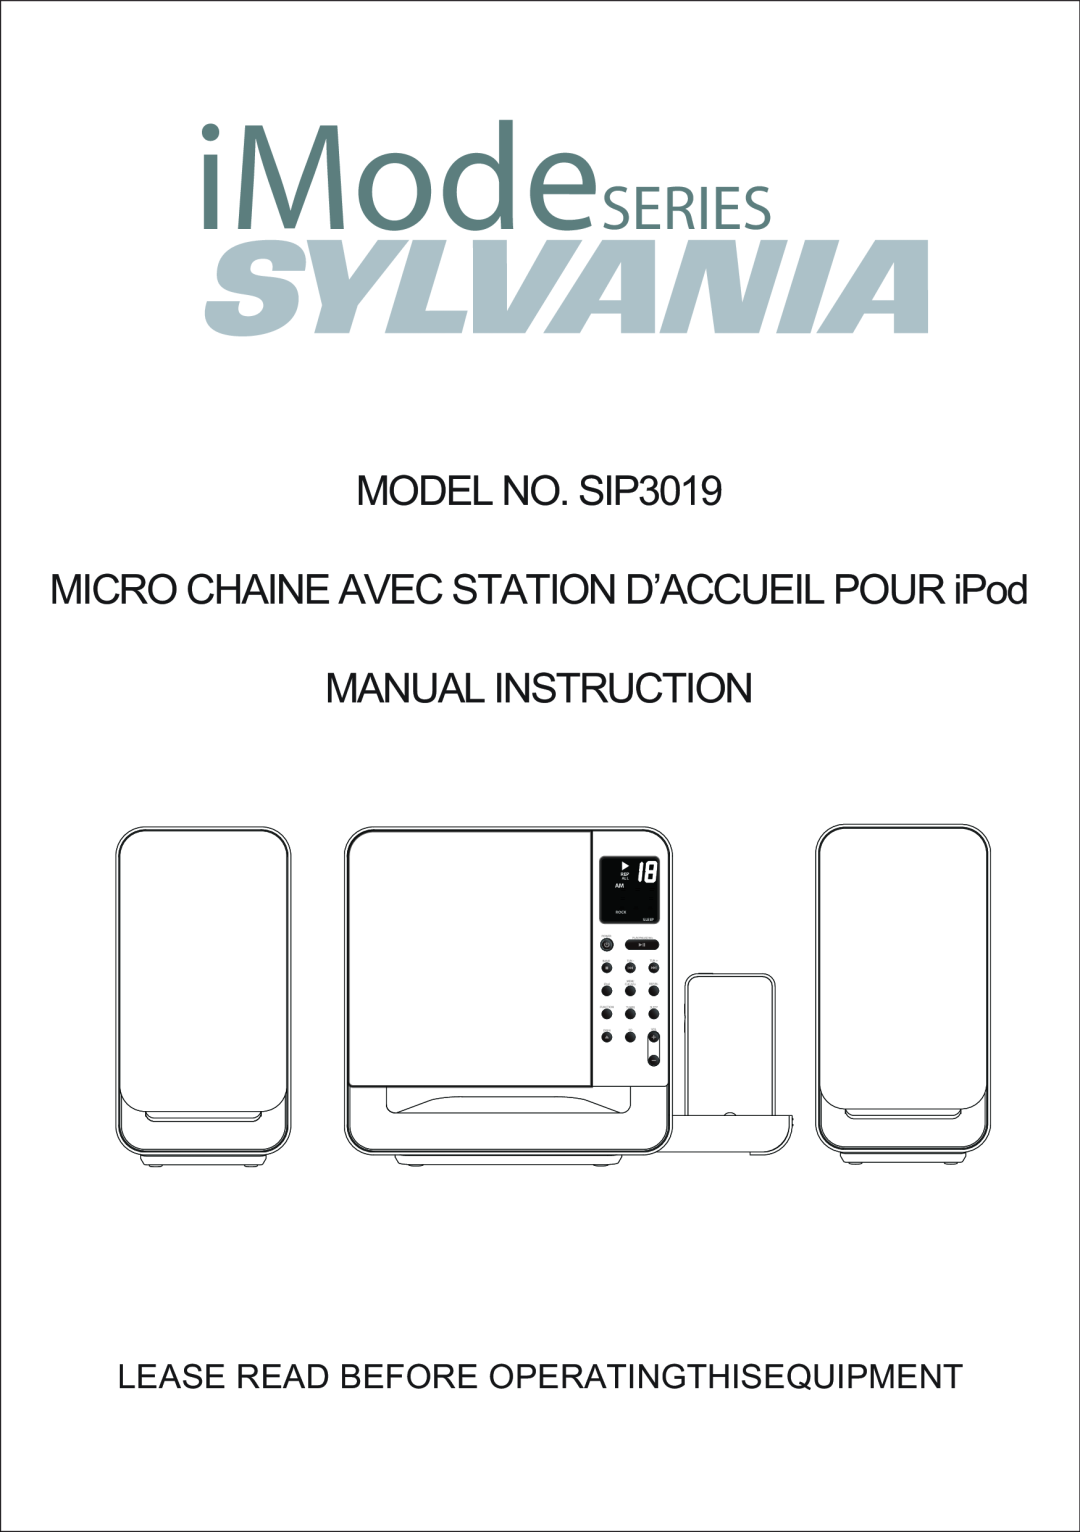 Sylvania manual iModeSERIES, Manual Instruction, MODEL NO. SIP3019, MICRO CHAINE AVEC STATION D’ACCUEIL POUR iPod, Rock 